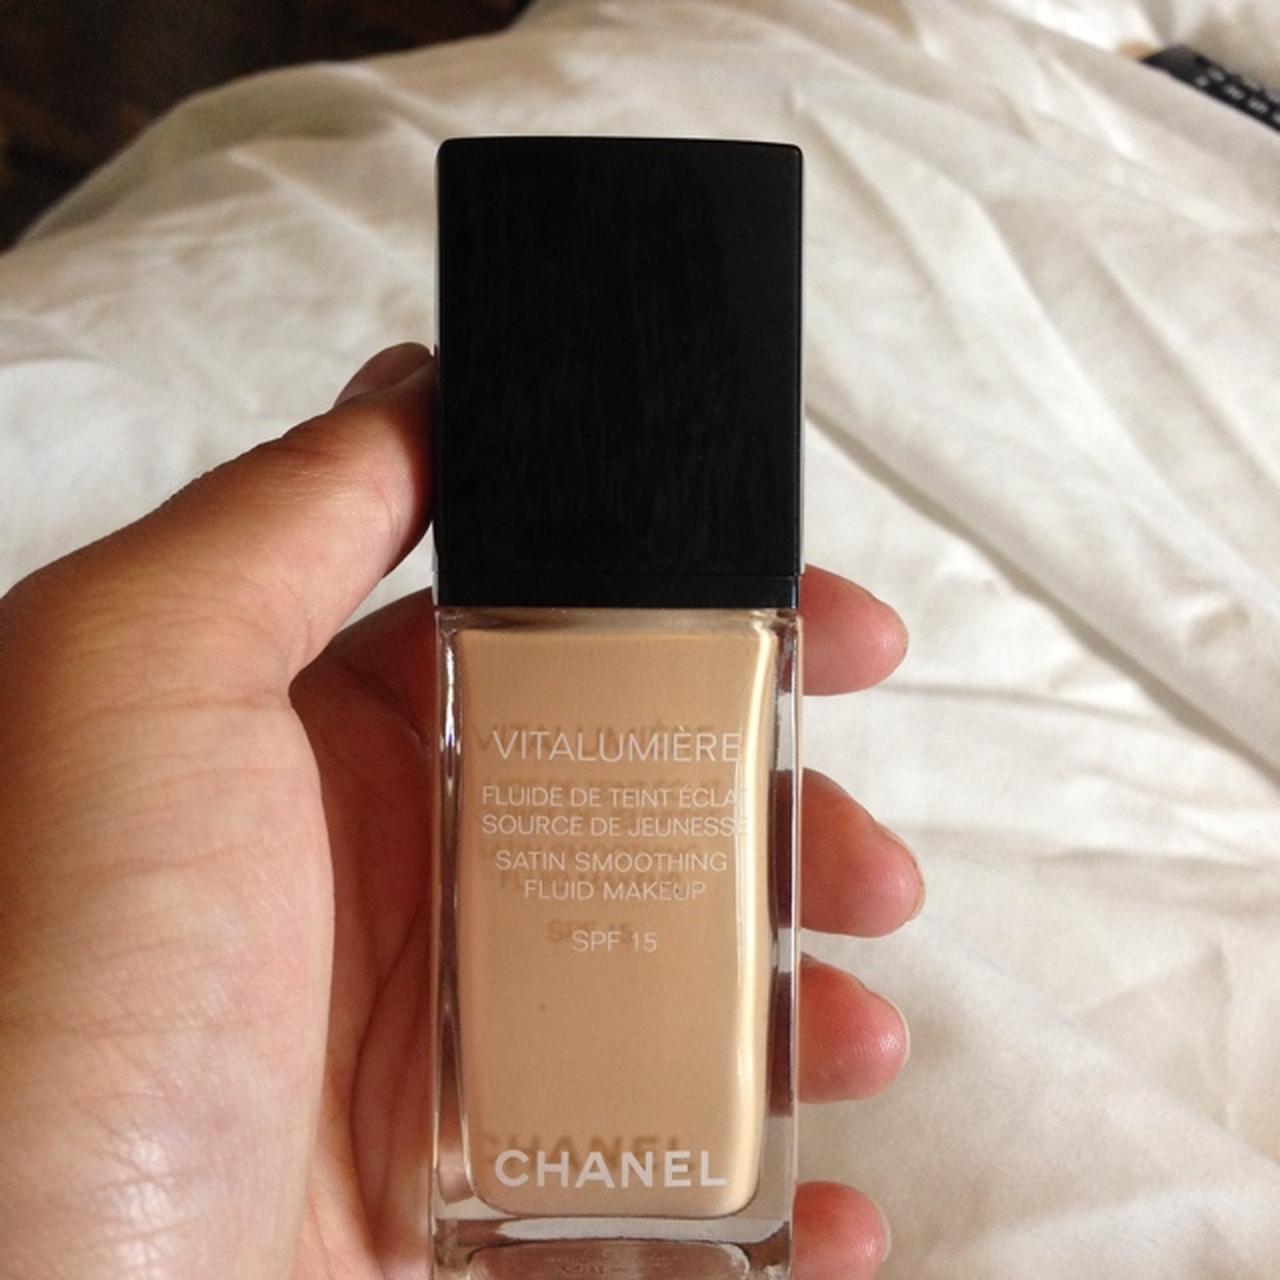 Chanel vitalumière in shade- 10 limpide nude Please